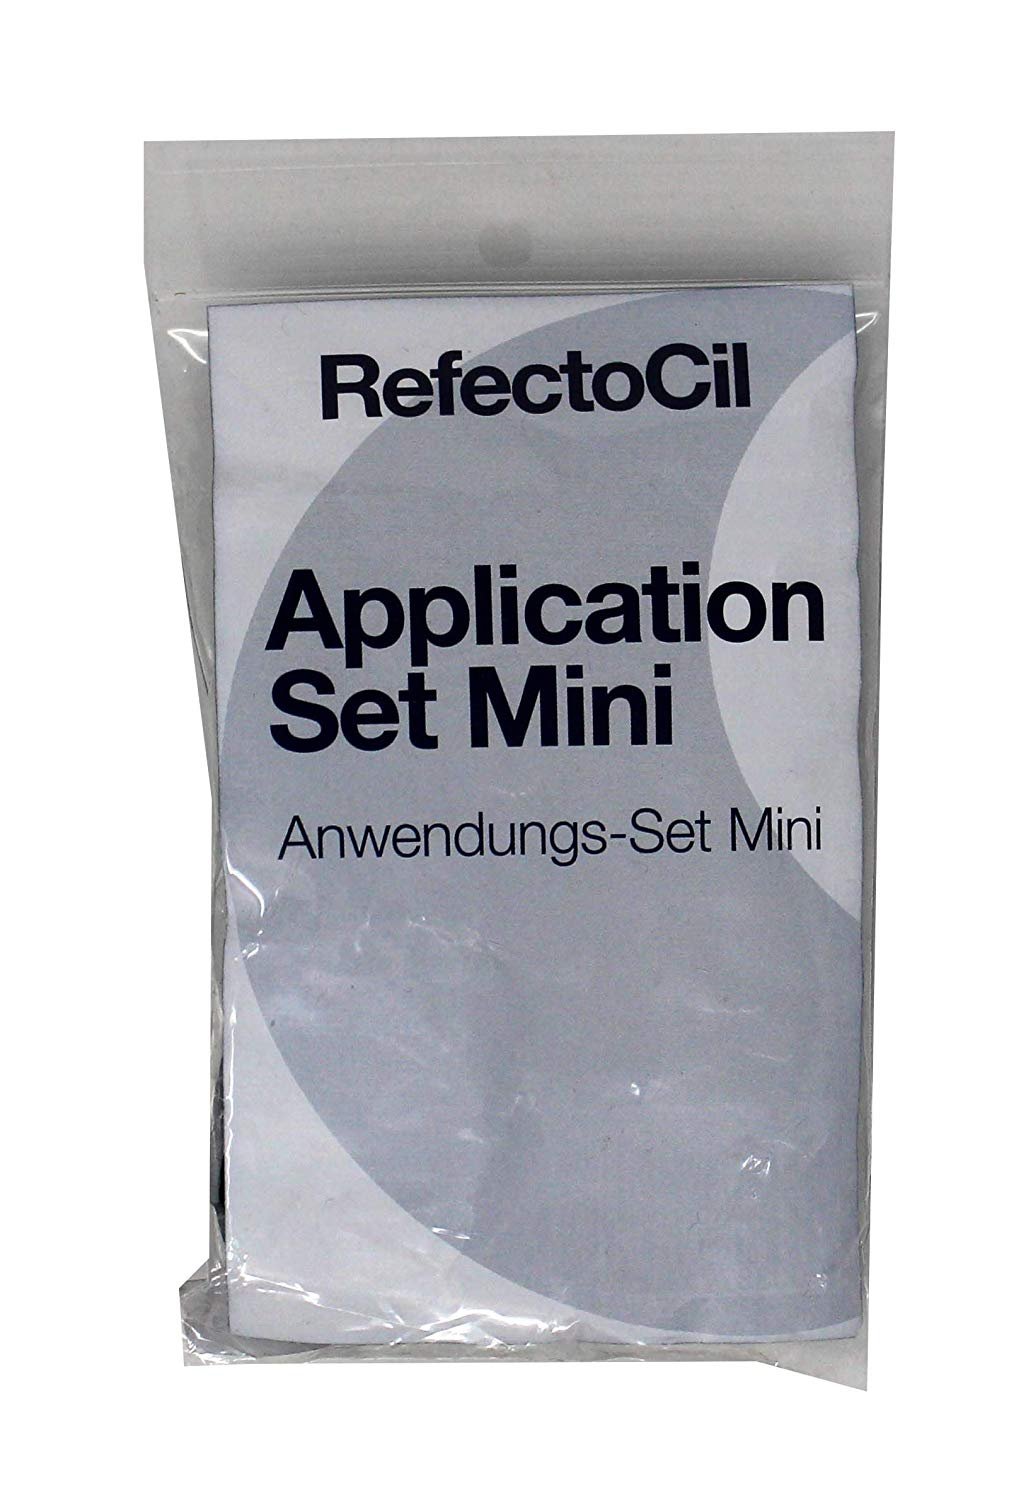 RefectoCil Application Set Mini - 5 Mini Tinting Dishes and 5 Application Sticks with rills